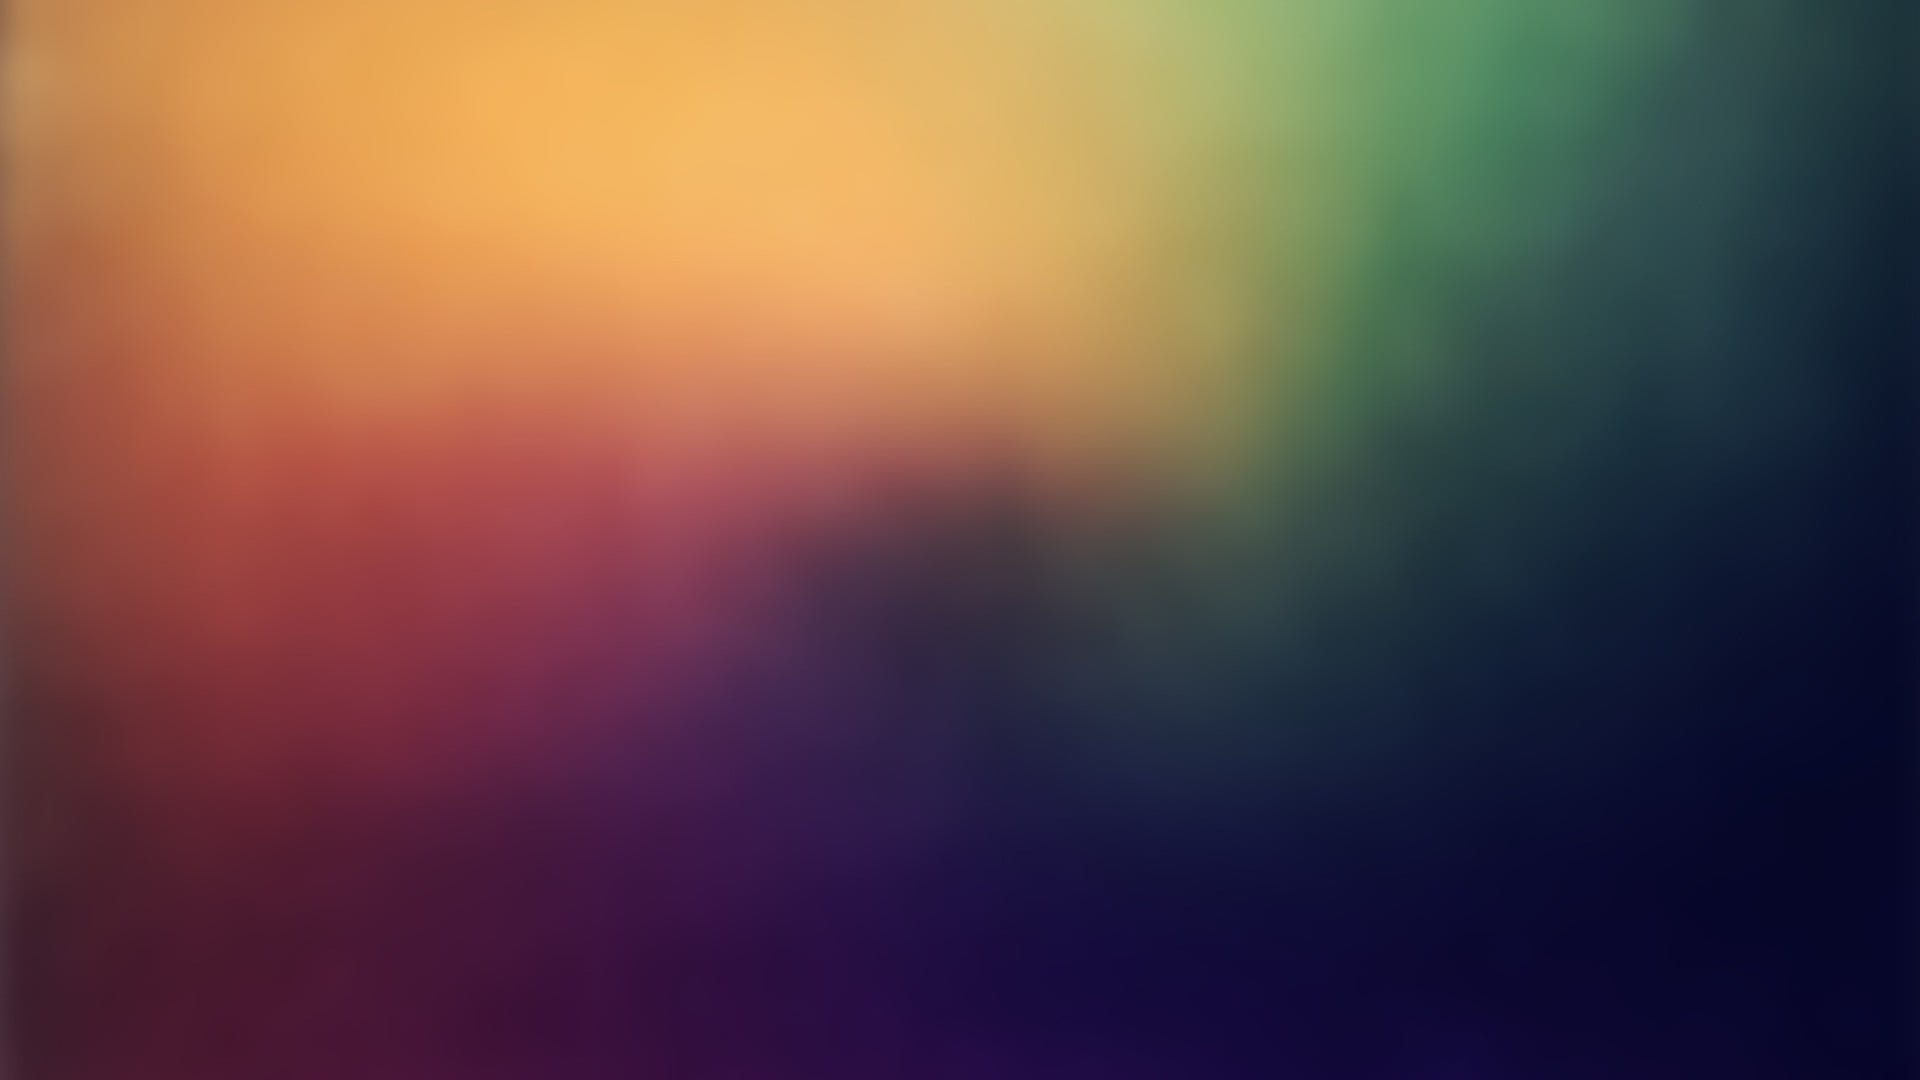 Android (operating system), gradient, digital art